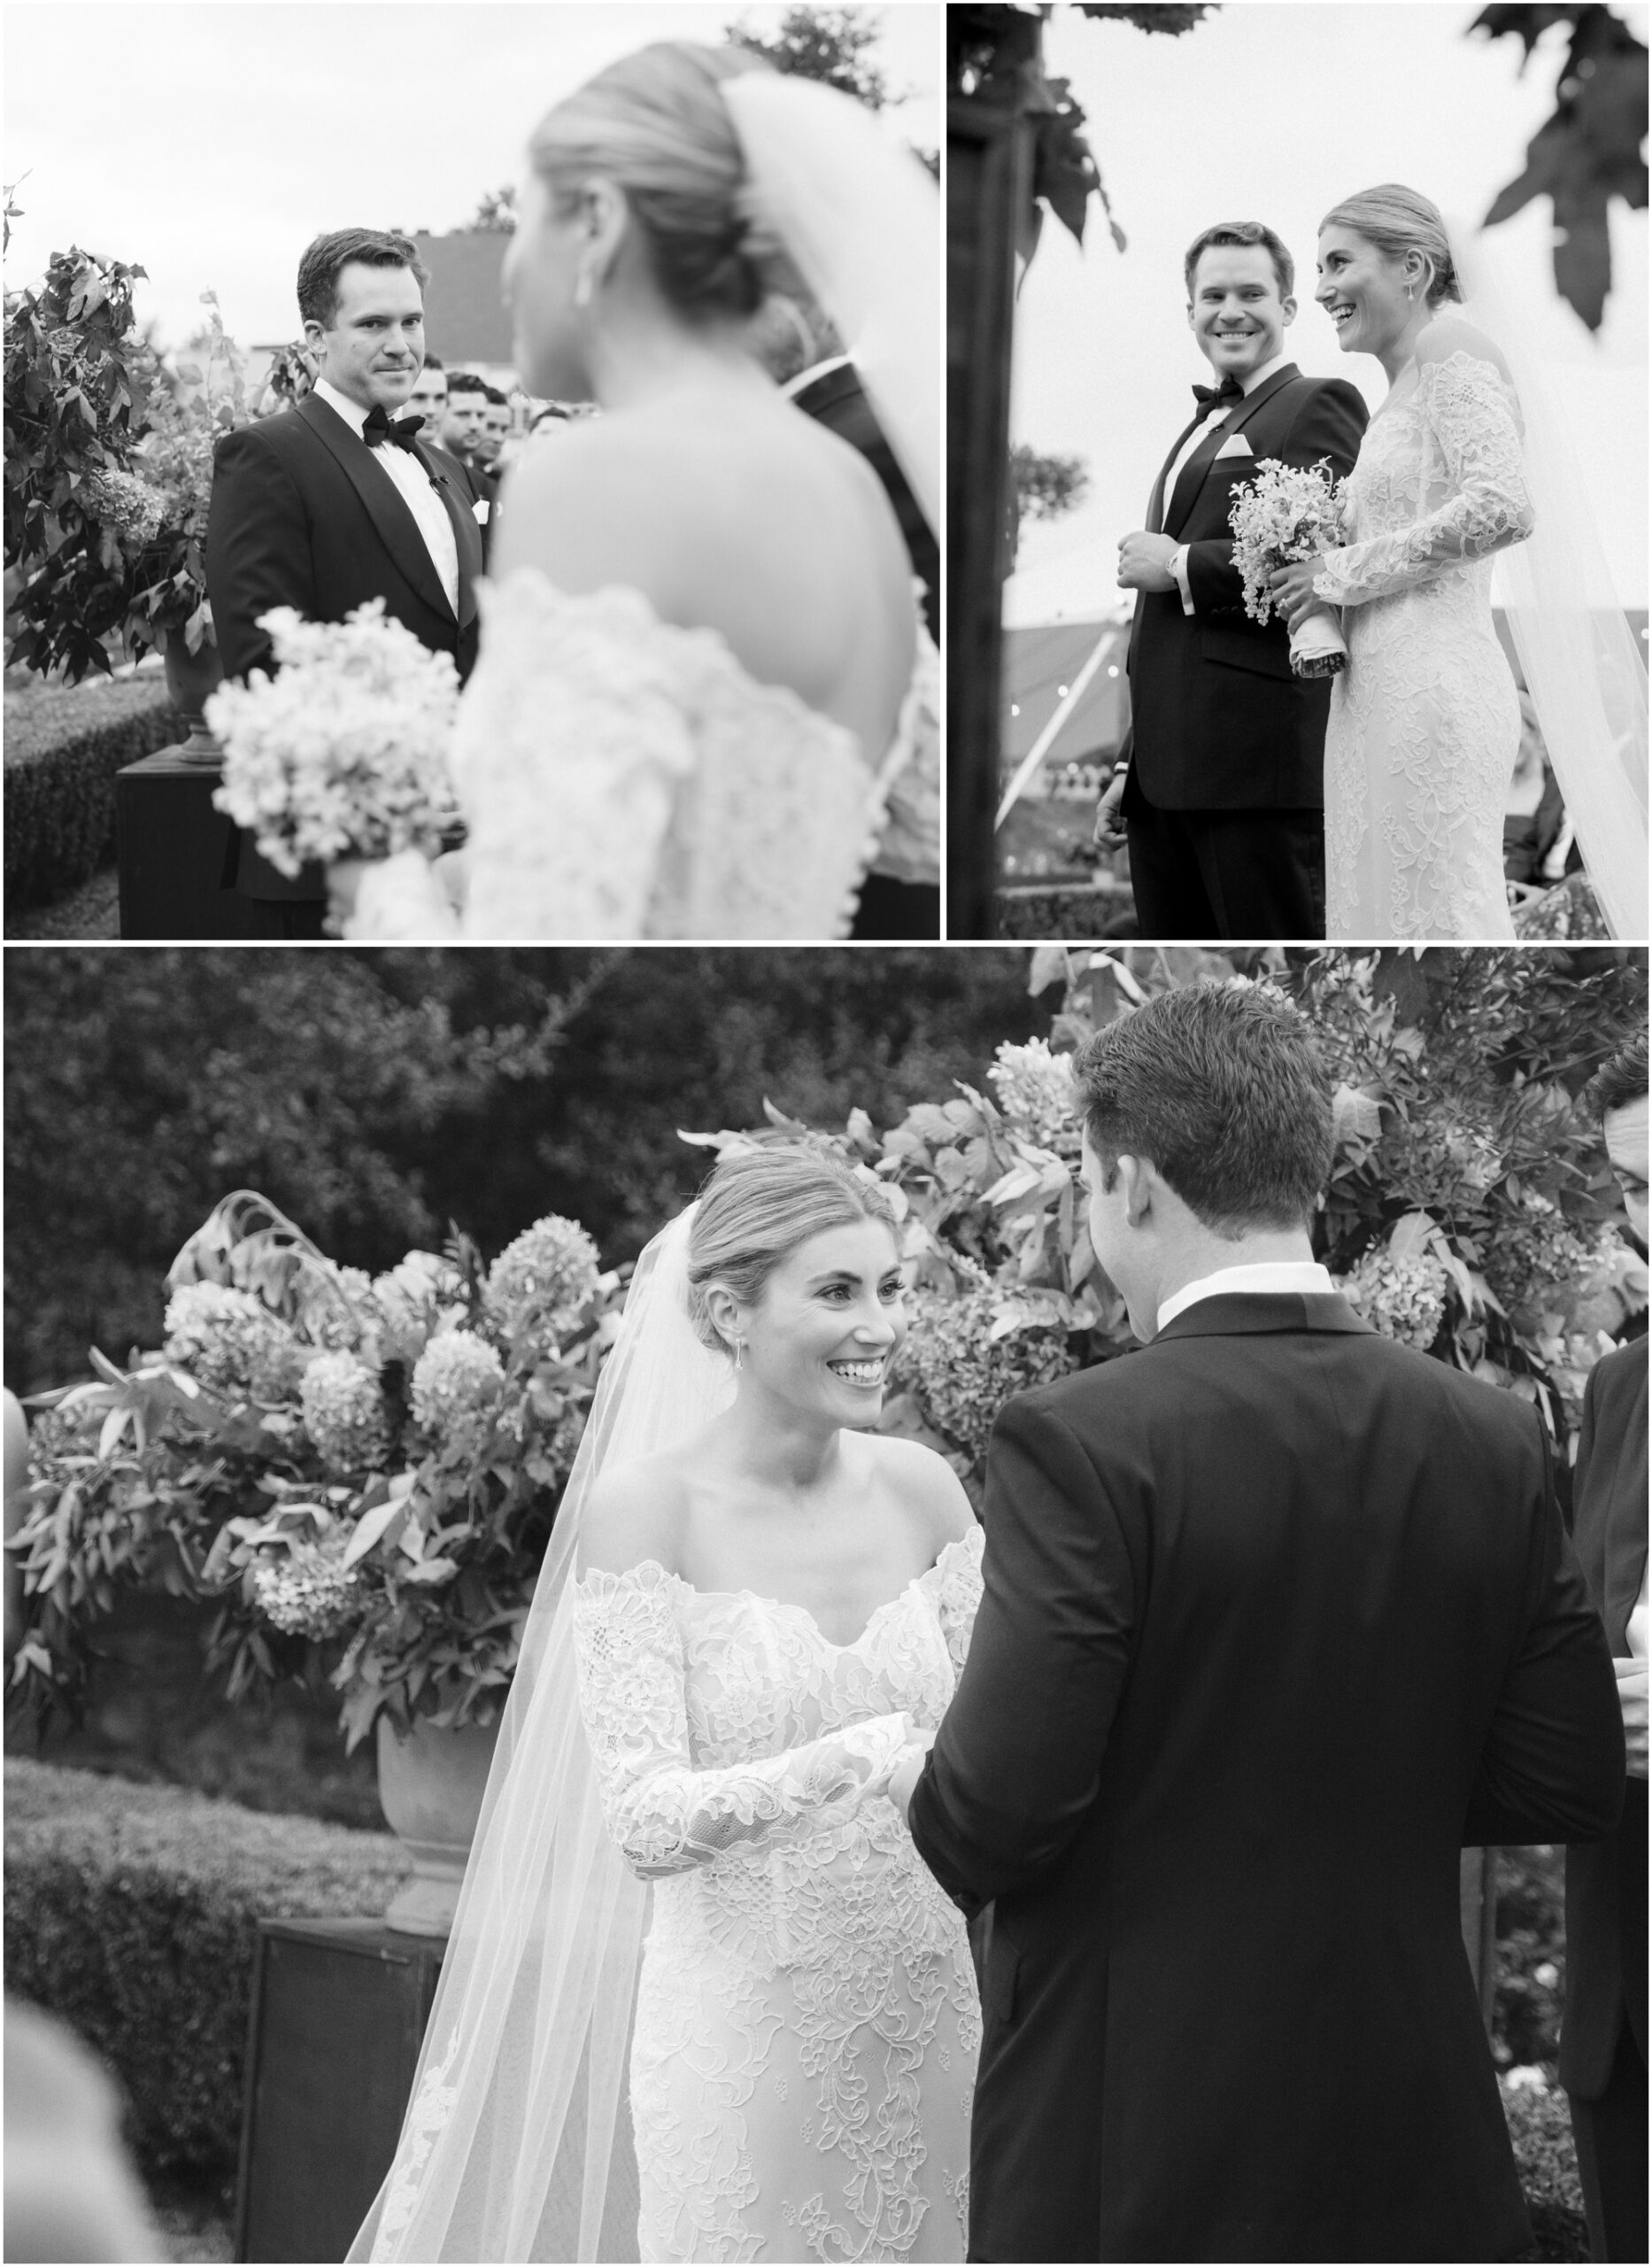 black and white portraits during a wedding ceremony at a wedding at commodore perry estate in austin texas